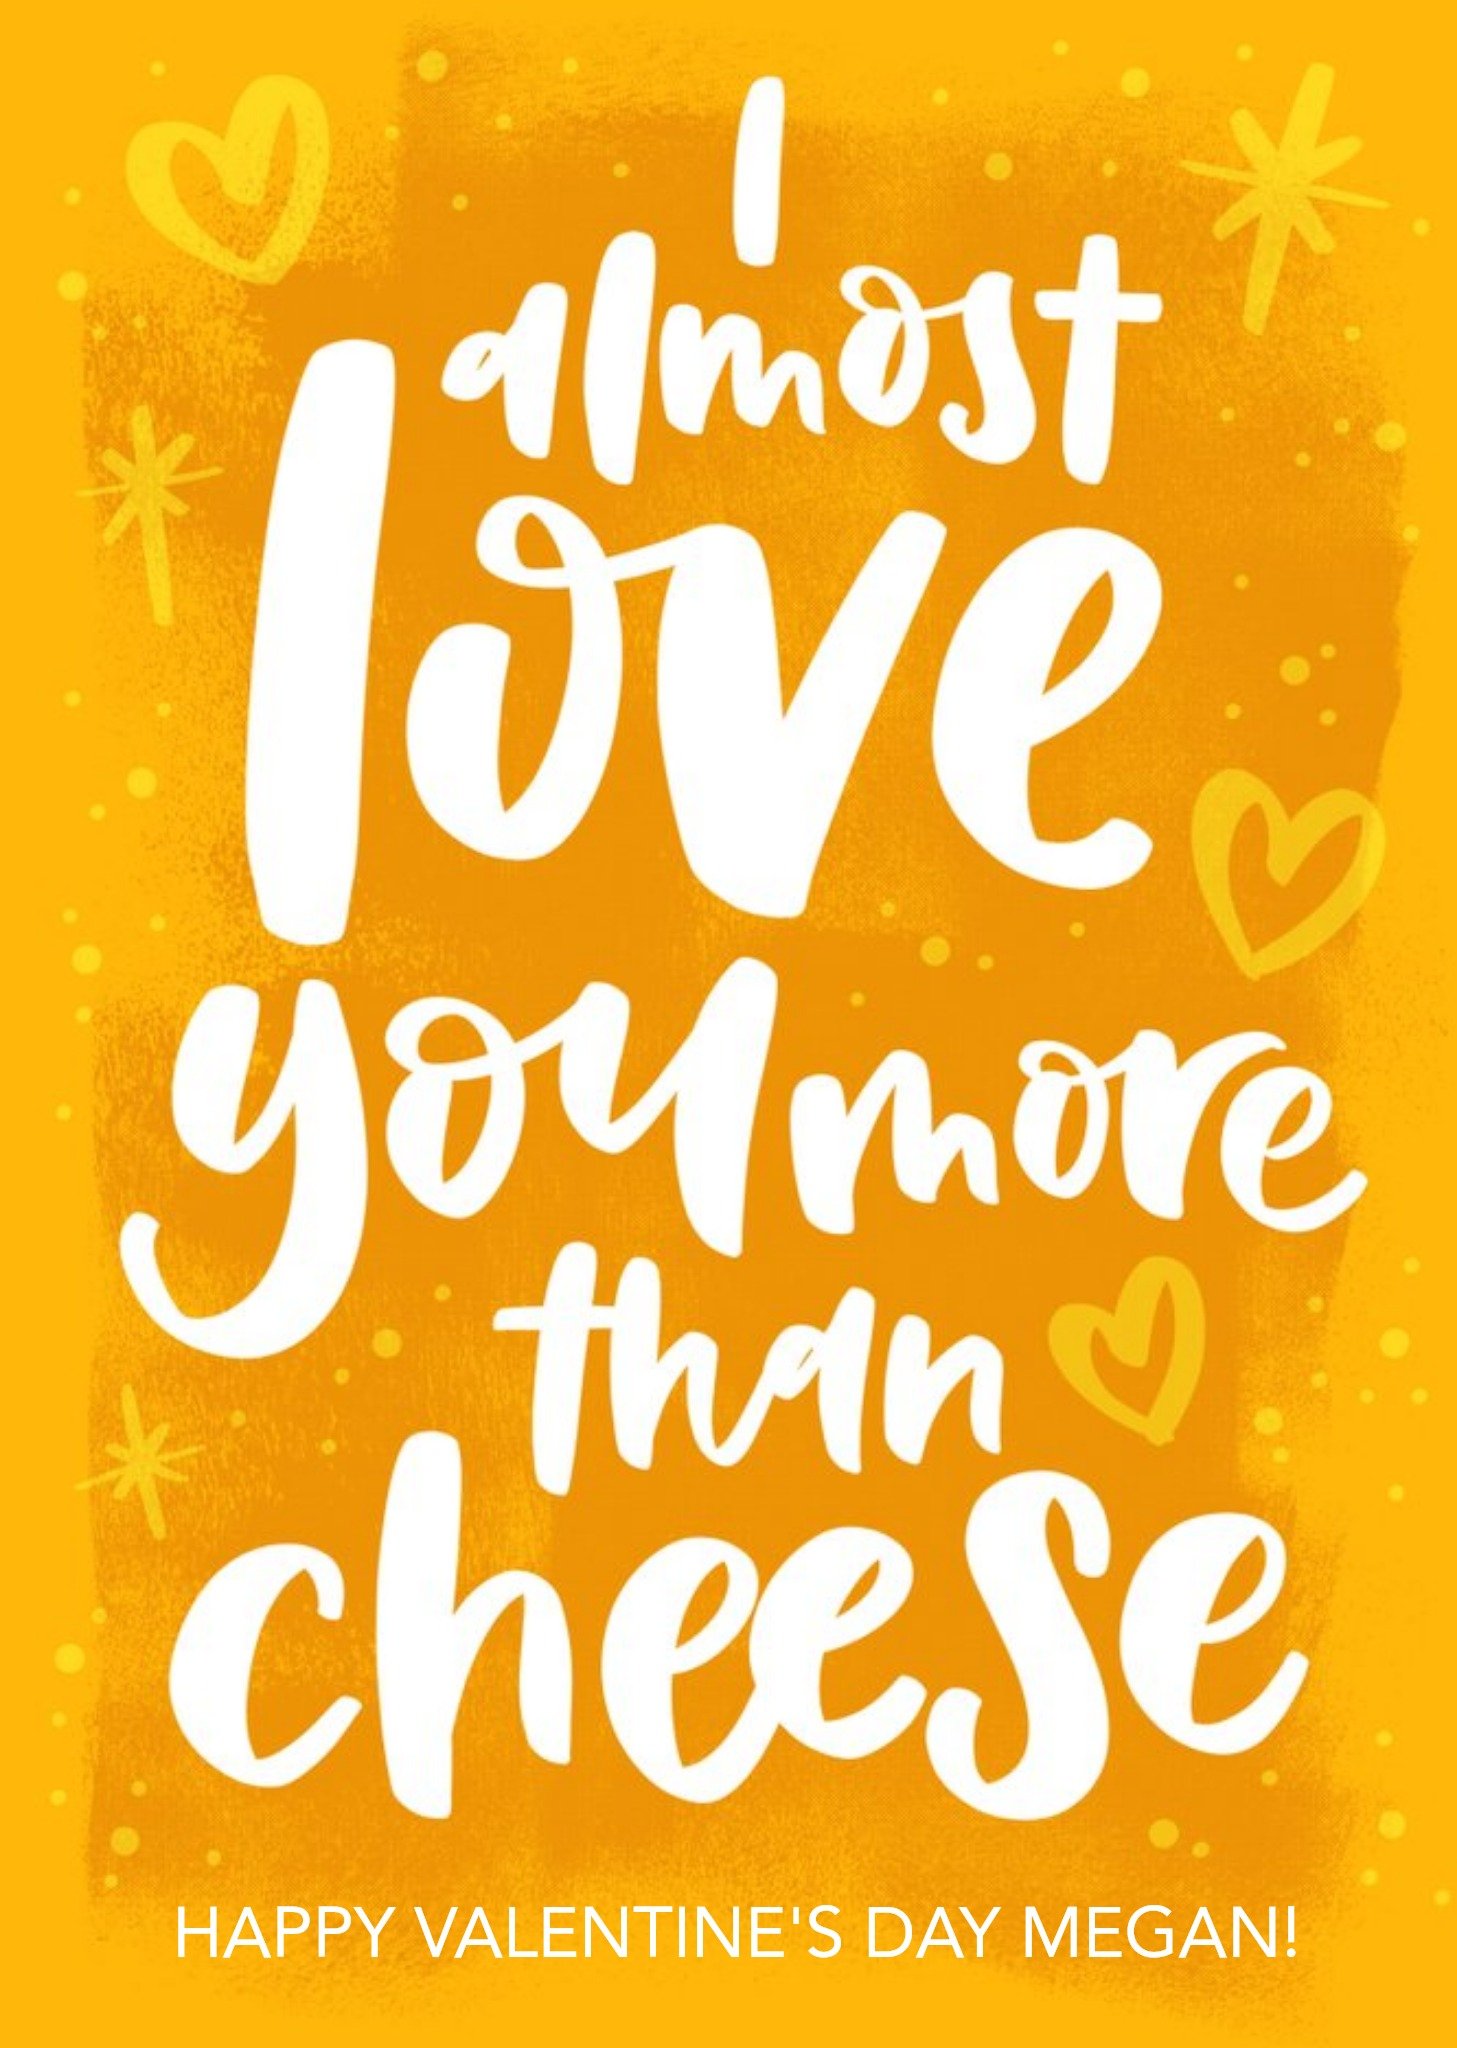 Moonpig I Almost Love You More Than Cheese Funny Valentine's Day Card, Large